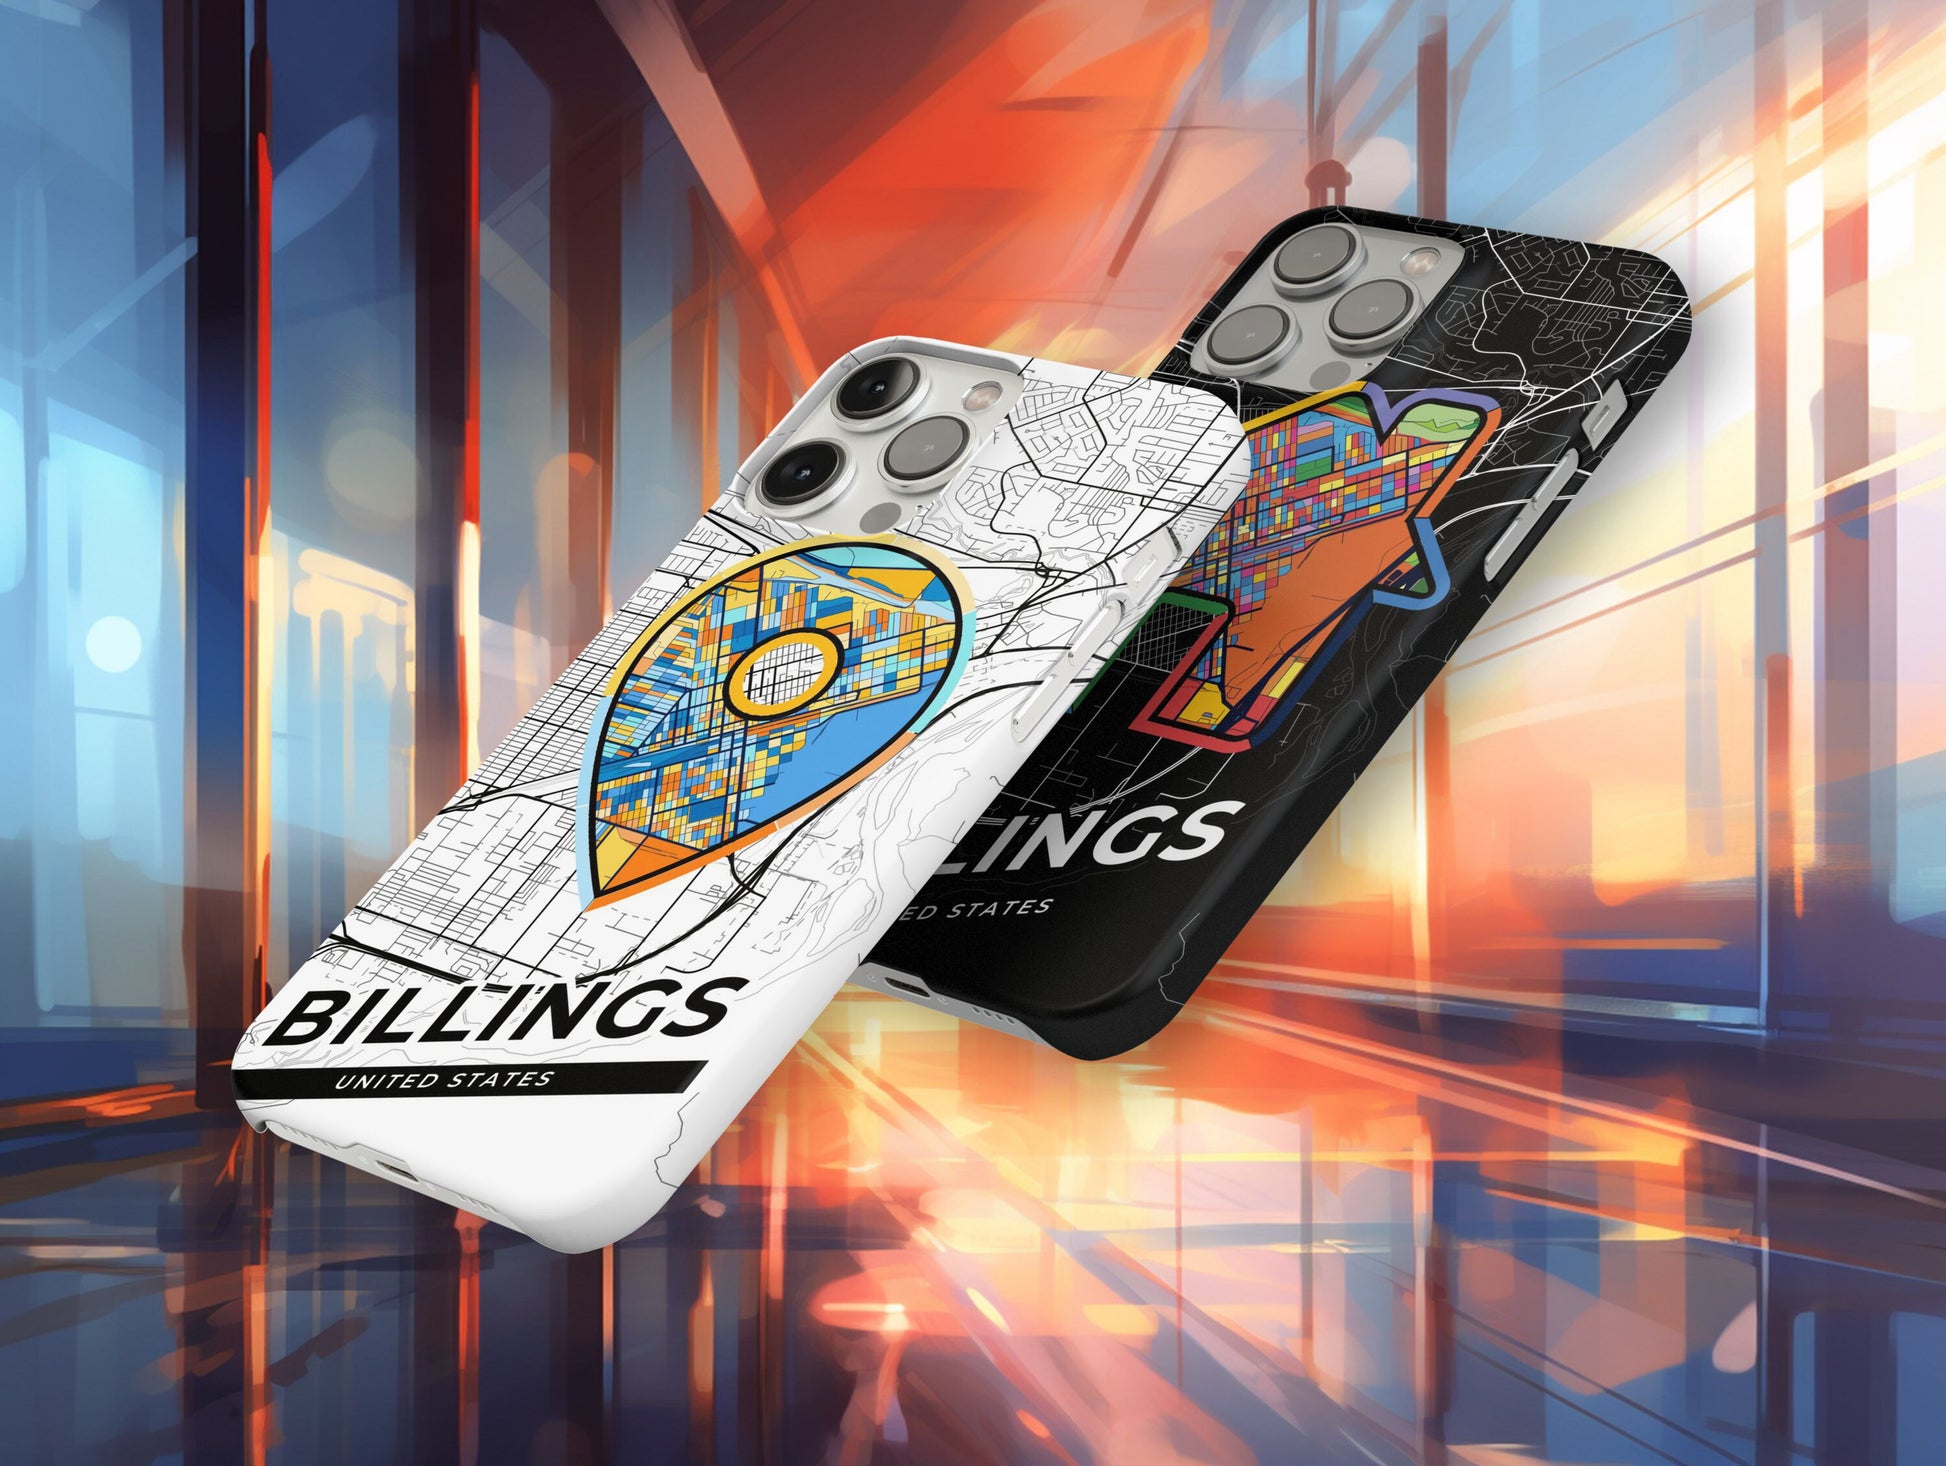 Billings Montana slim phone case with colorful icon. Birthday, wedding or housewarming gift. Couple match cases.